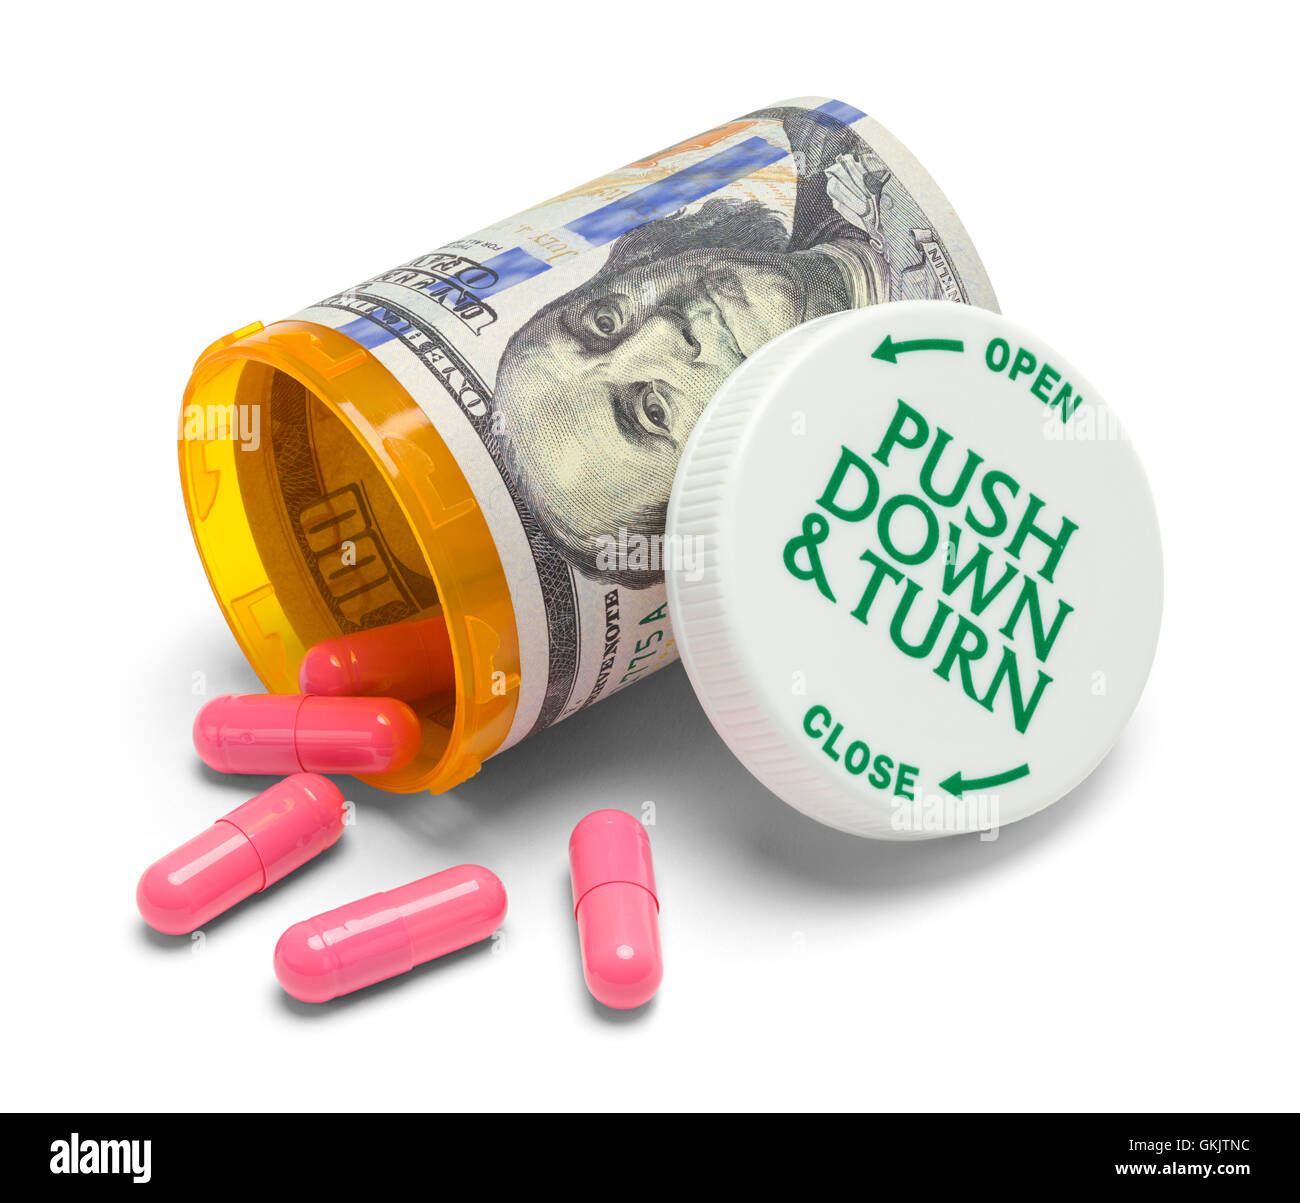 Money Pill Bottle with Pink Pills Isolated on White Background. Stock Photo